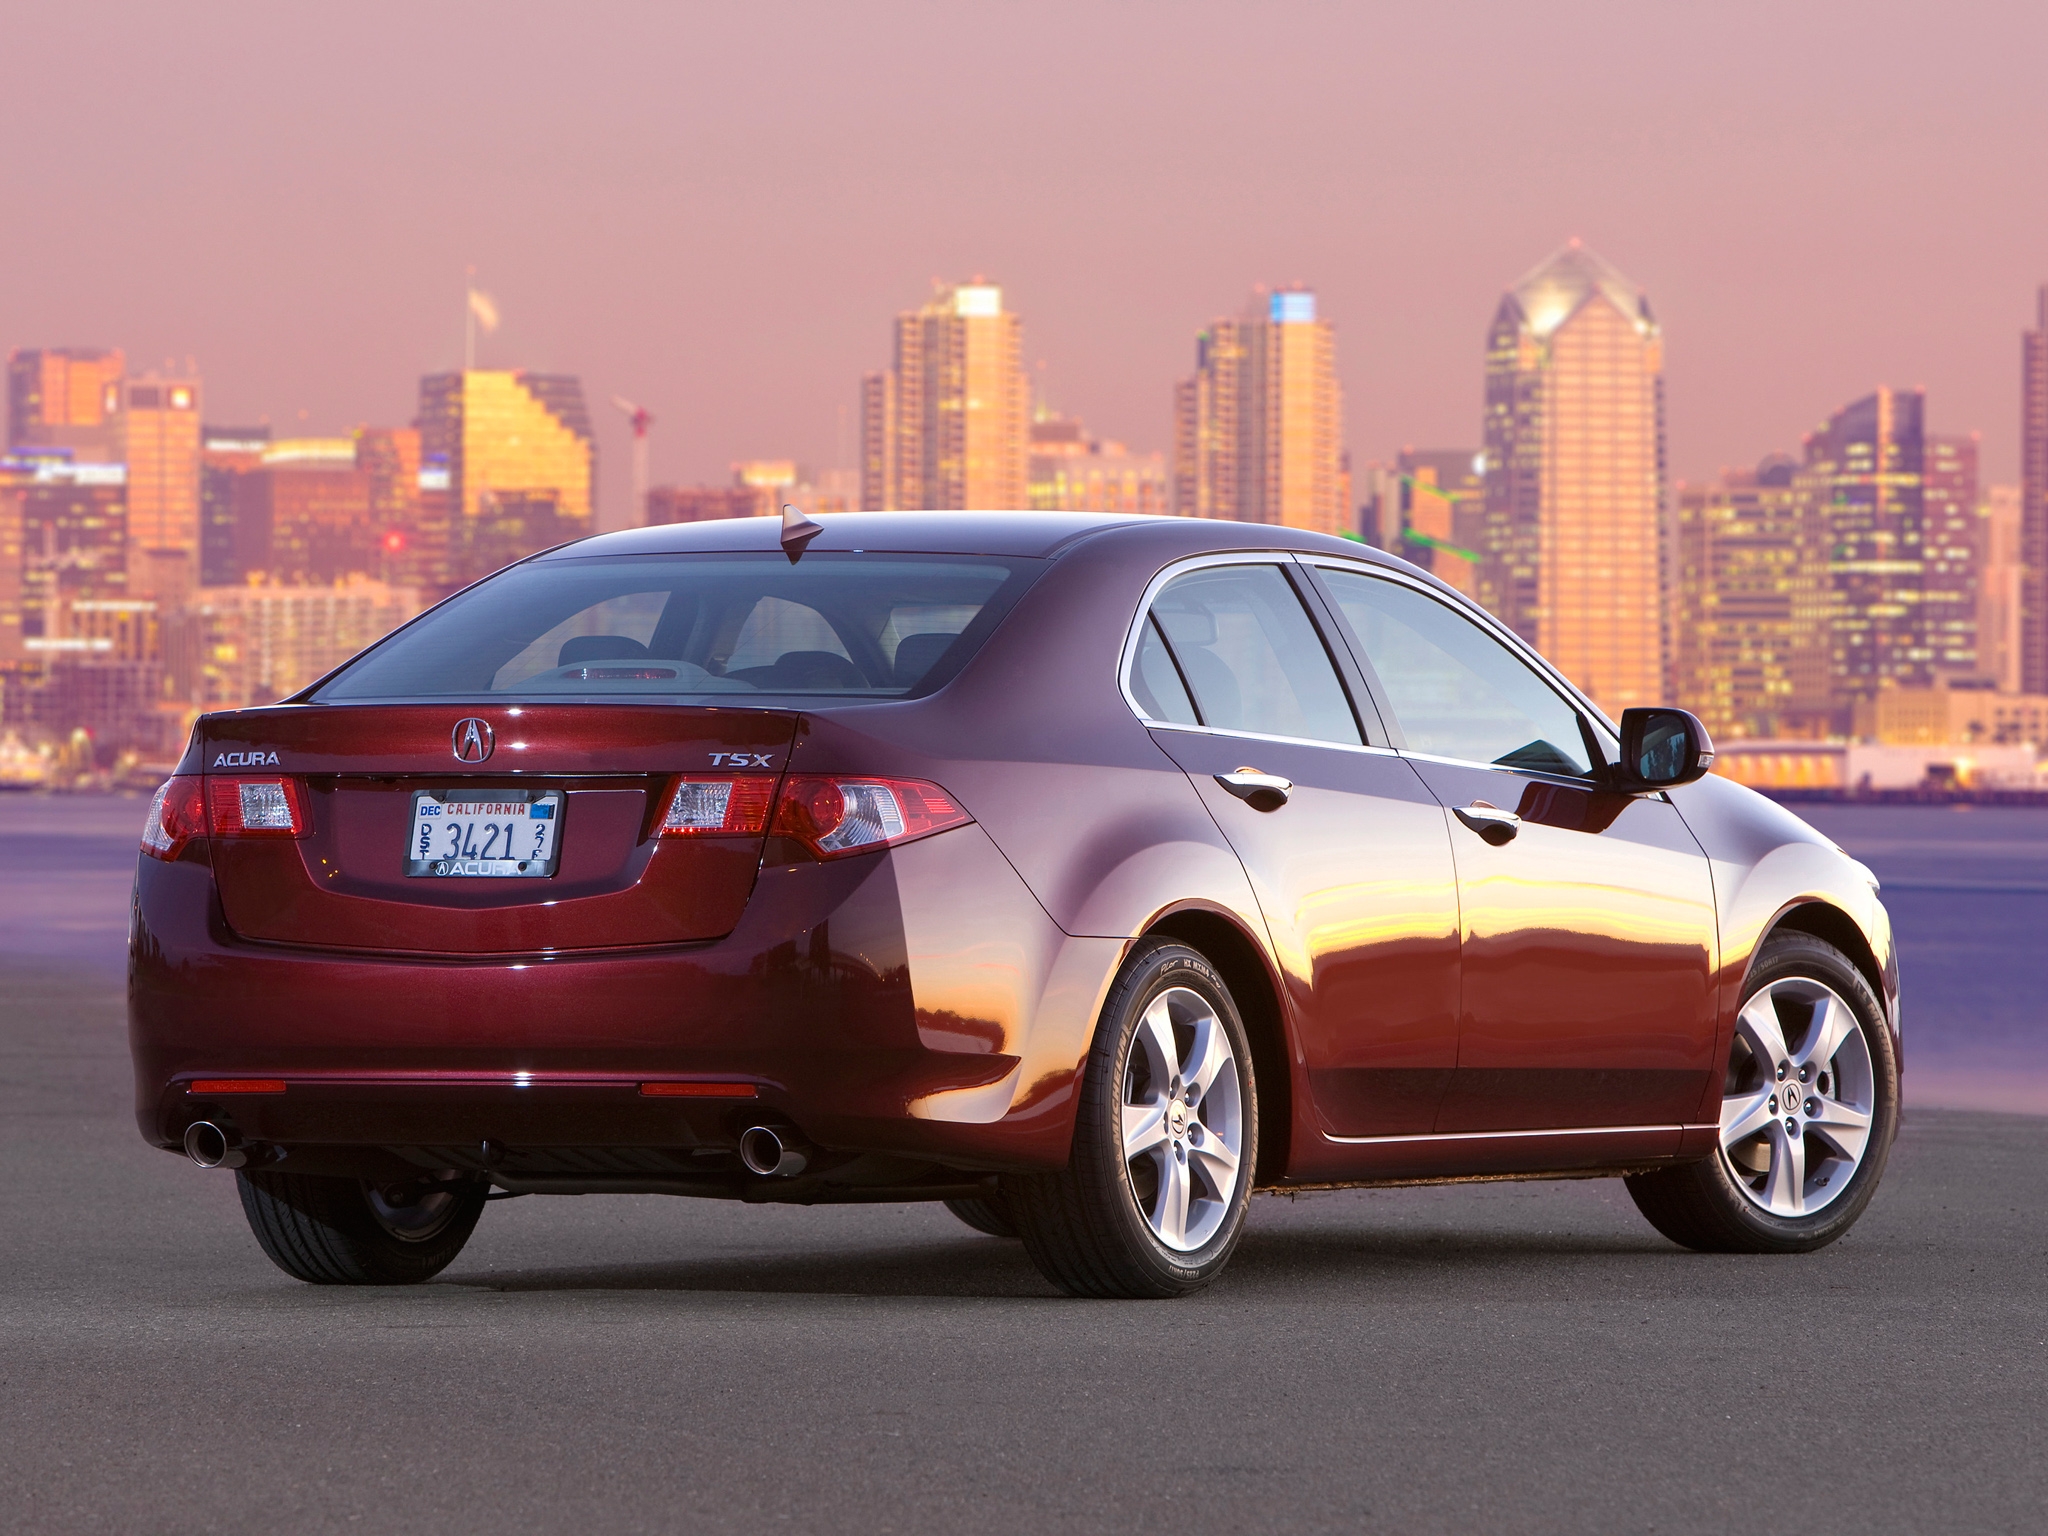 houses, auto, acura, cars, red, city, lights, asphalt, back view, rear view, style, akura, 2008, tsx